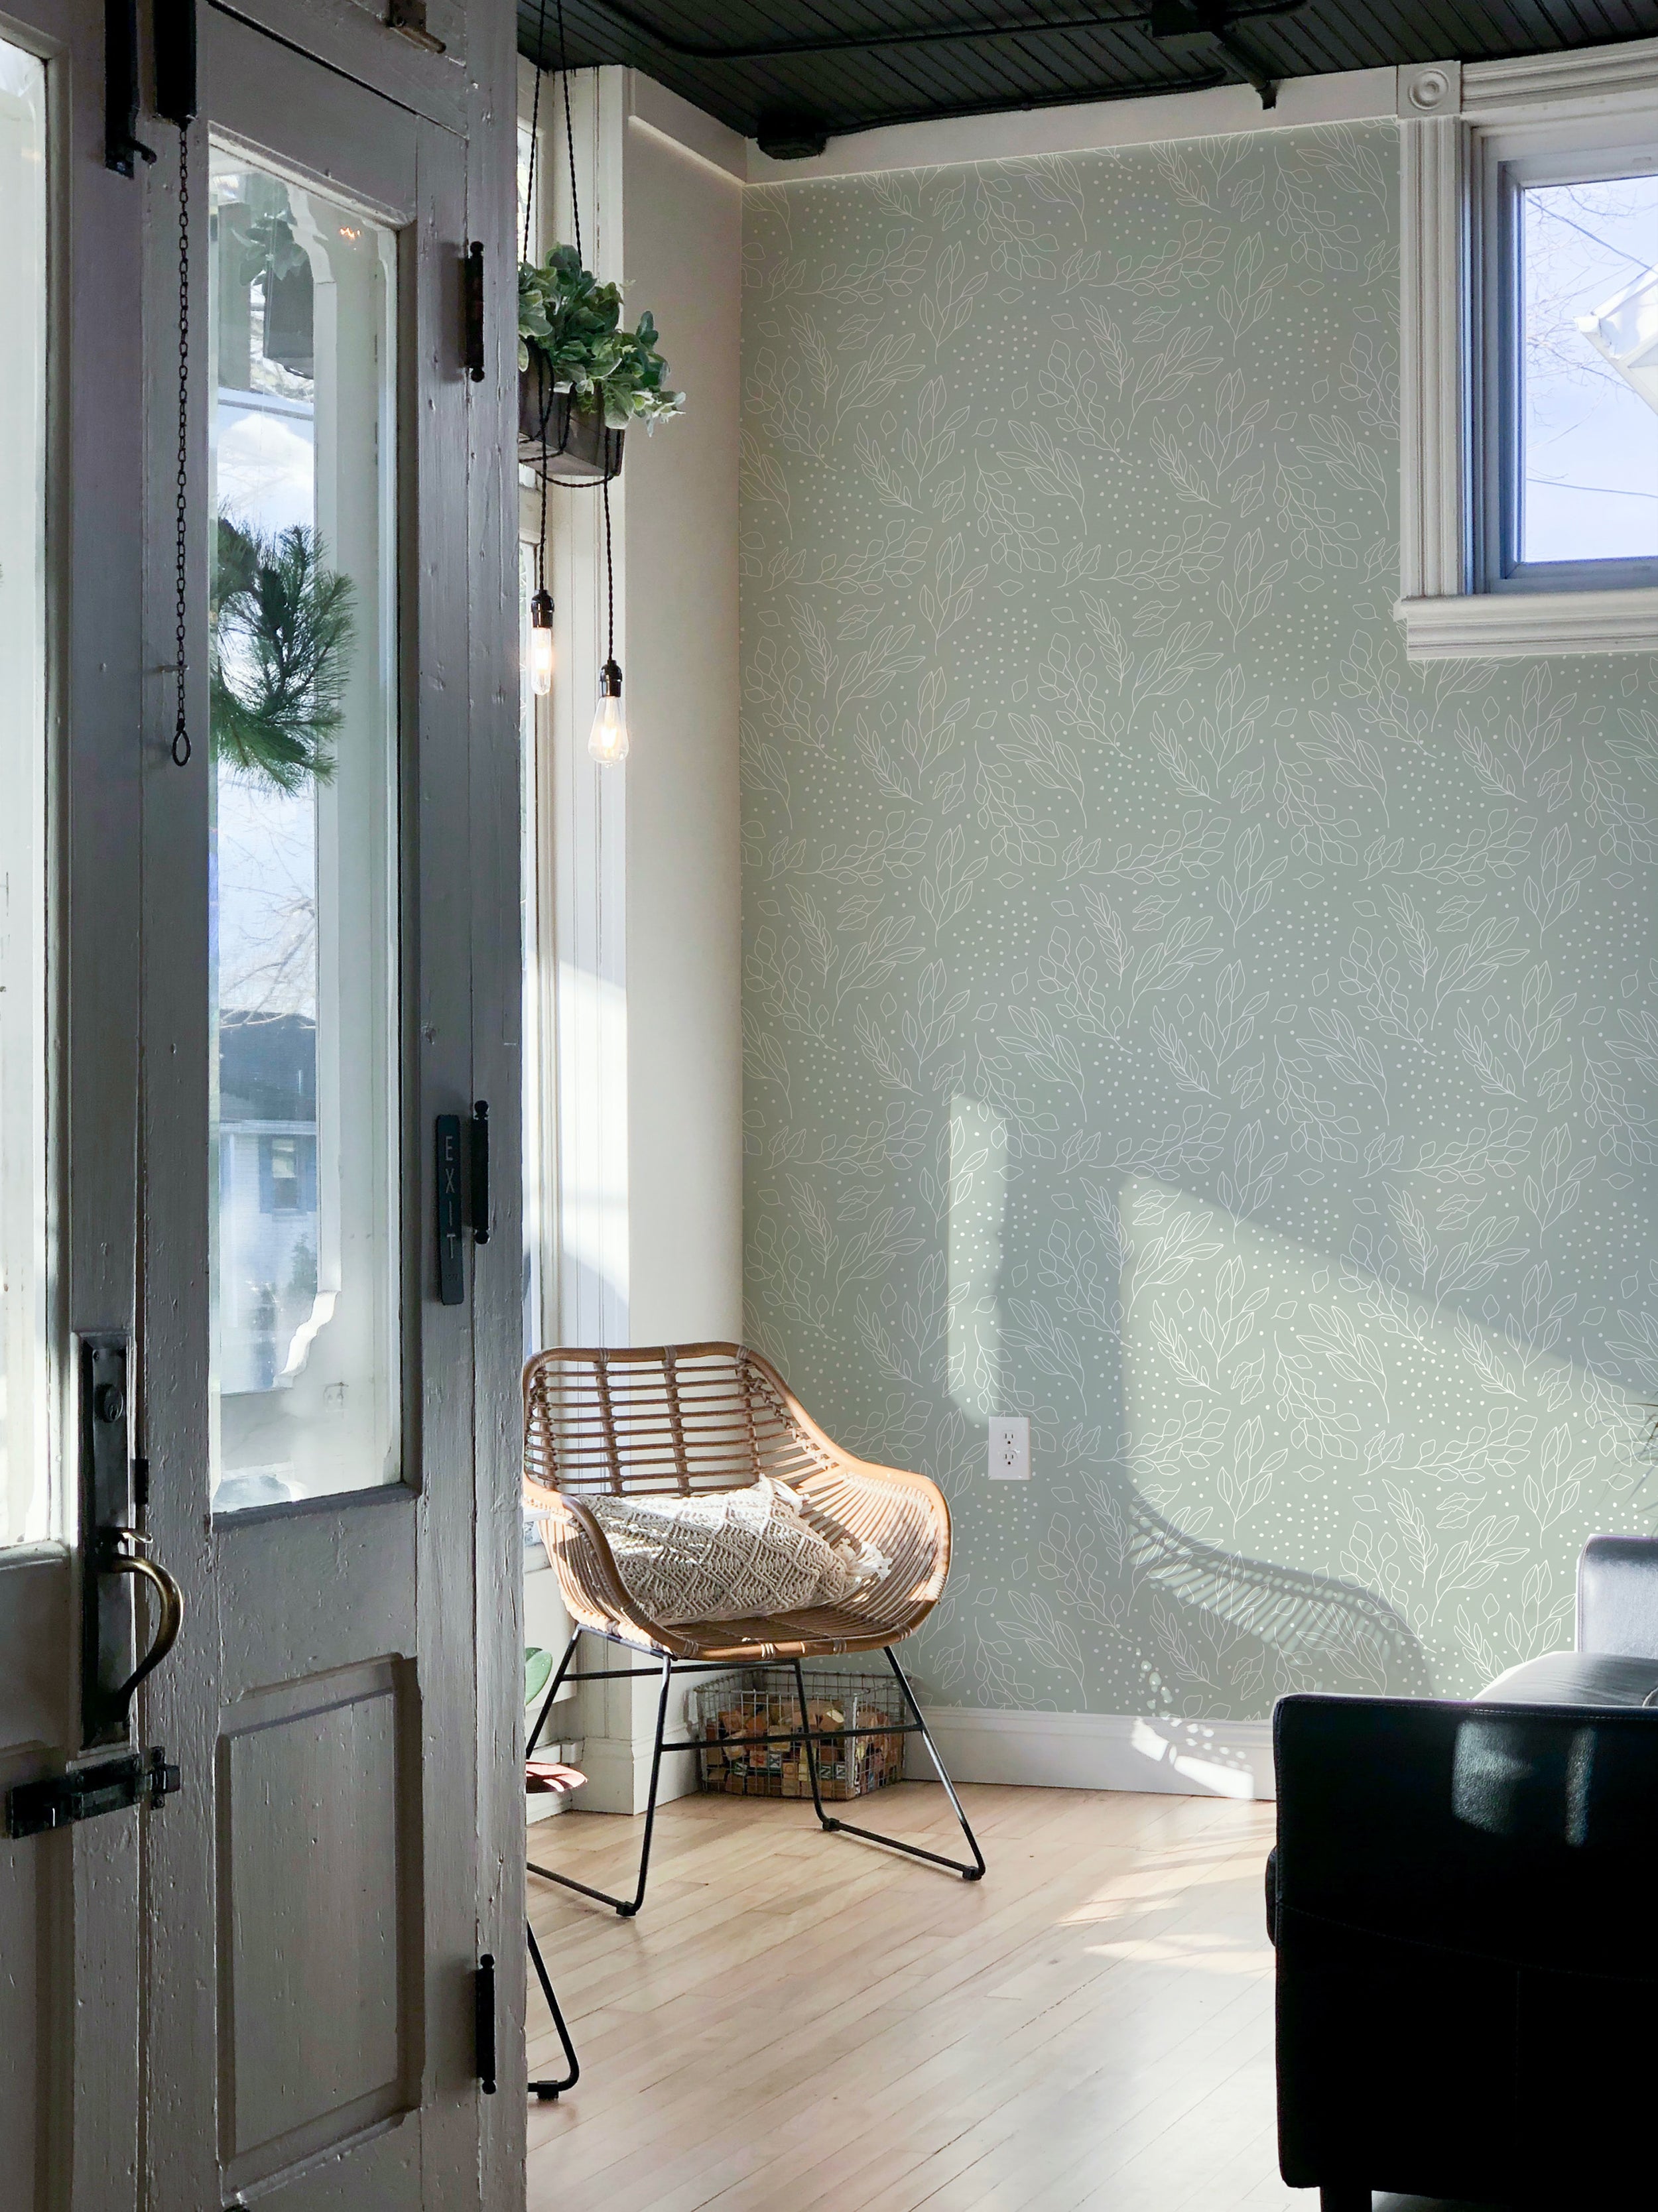 A tranquil entryway featuring Ferns and Leaves Wallpaper, showcasing a subtle leaf pattern in soft green tones. The decor includes a rattan chair by the window and vintage style hanging lights, creating a warm and welcoming atmosphere.